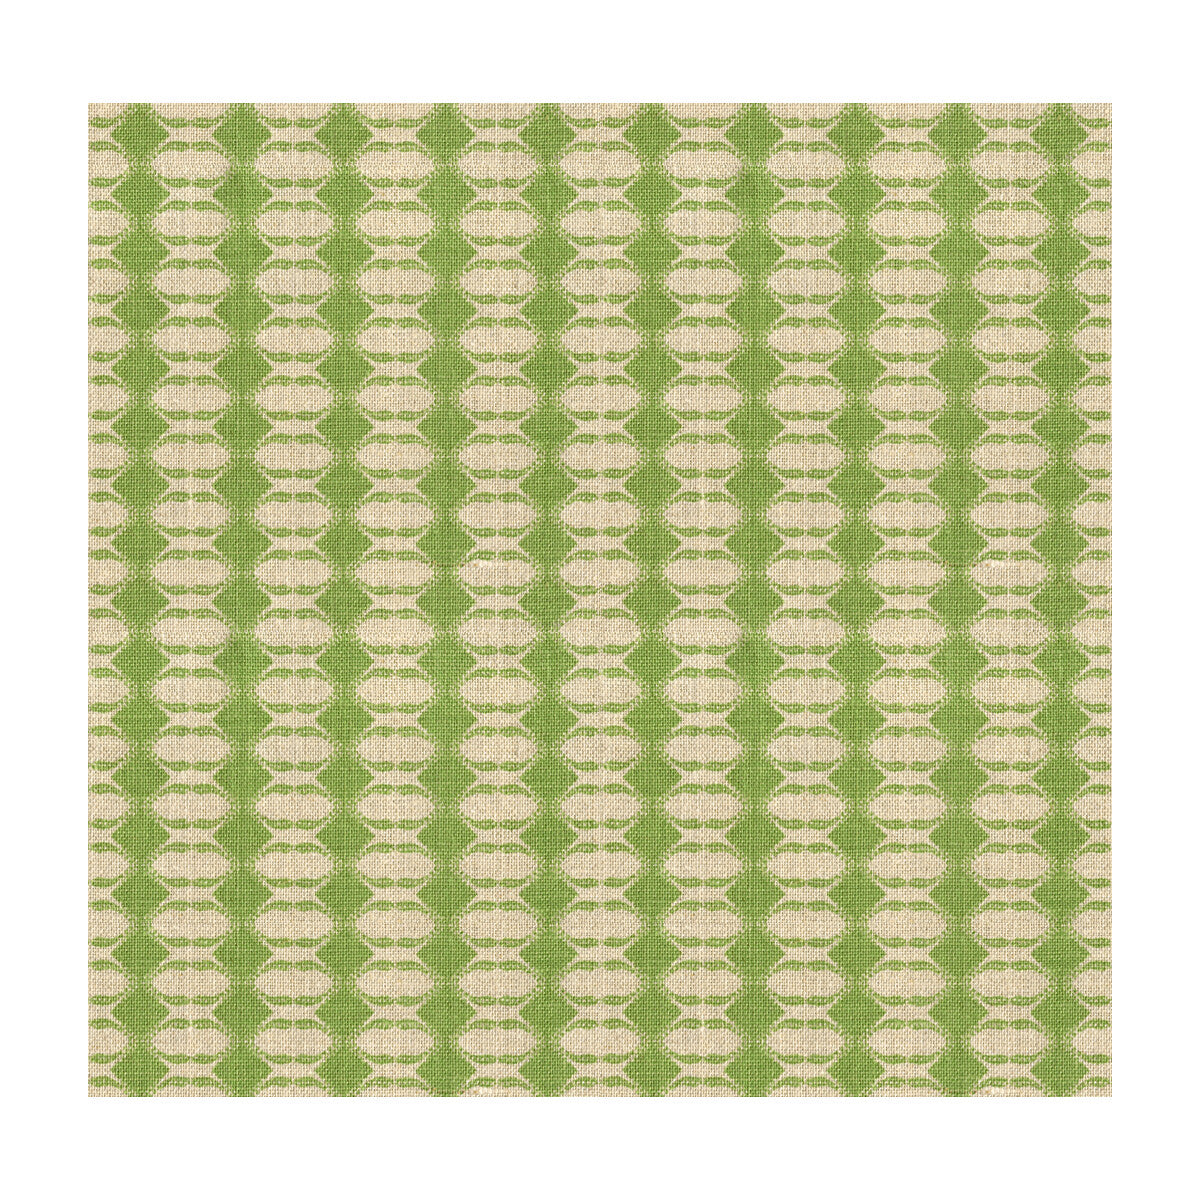 Diamond fabric in meadow color - pattern GWF-3507.3.0 - by Lee Jofa Modern in the Allegra Hicks Garden collection